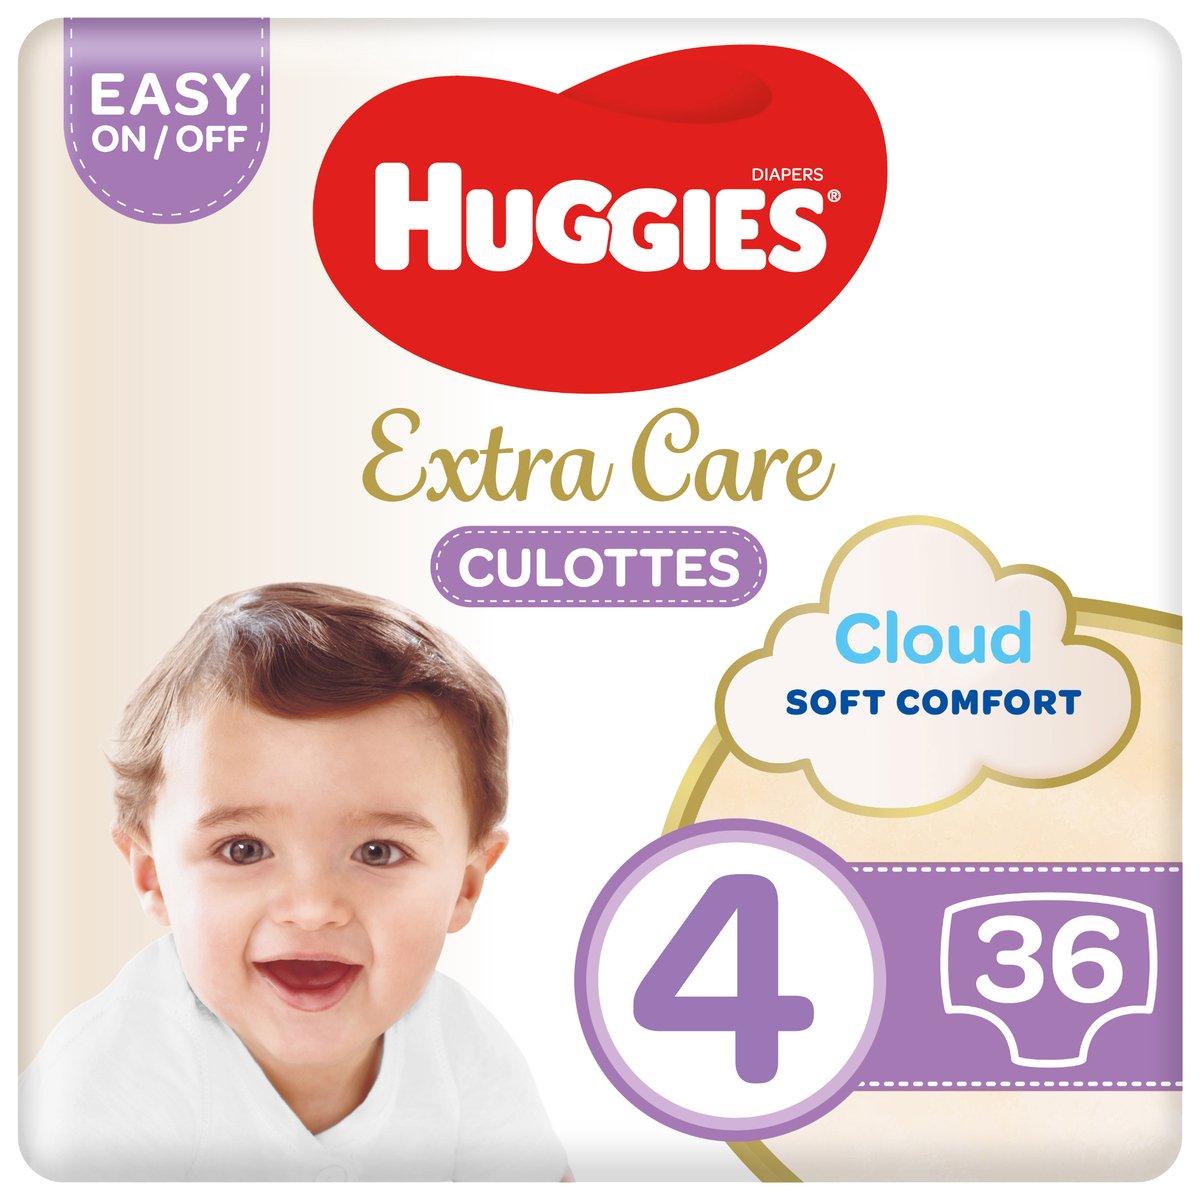 Buy Pampers Baby-Dry Pants Diapers With Aloe Vera Lotion Size 5 (12-18kg)  22 Pants Online - Shop Baby Products on Carrefour UAE